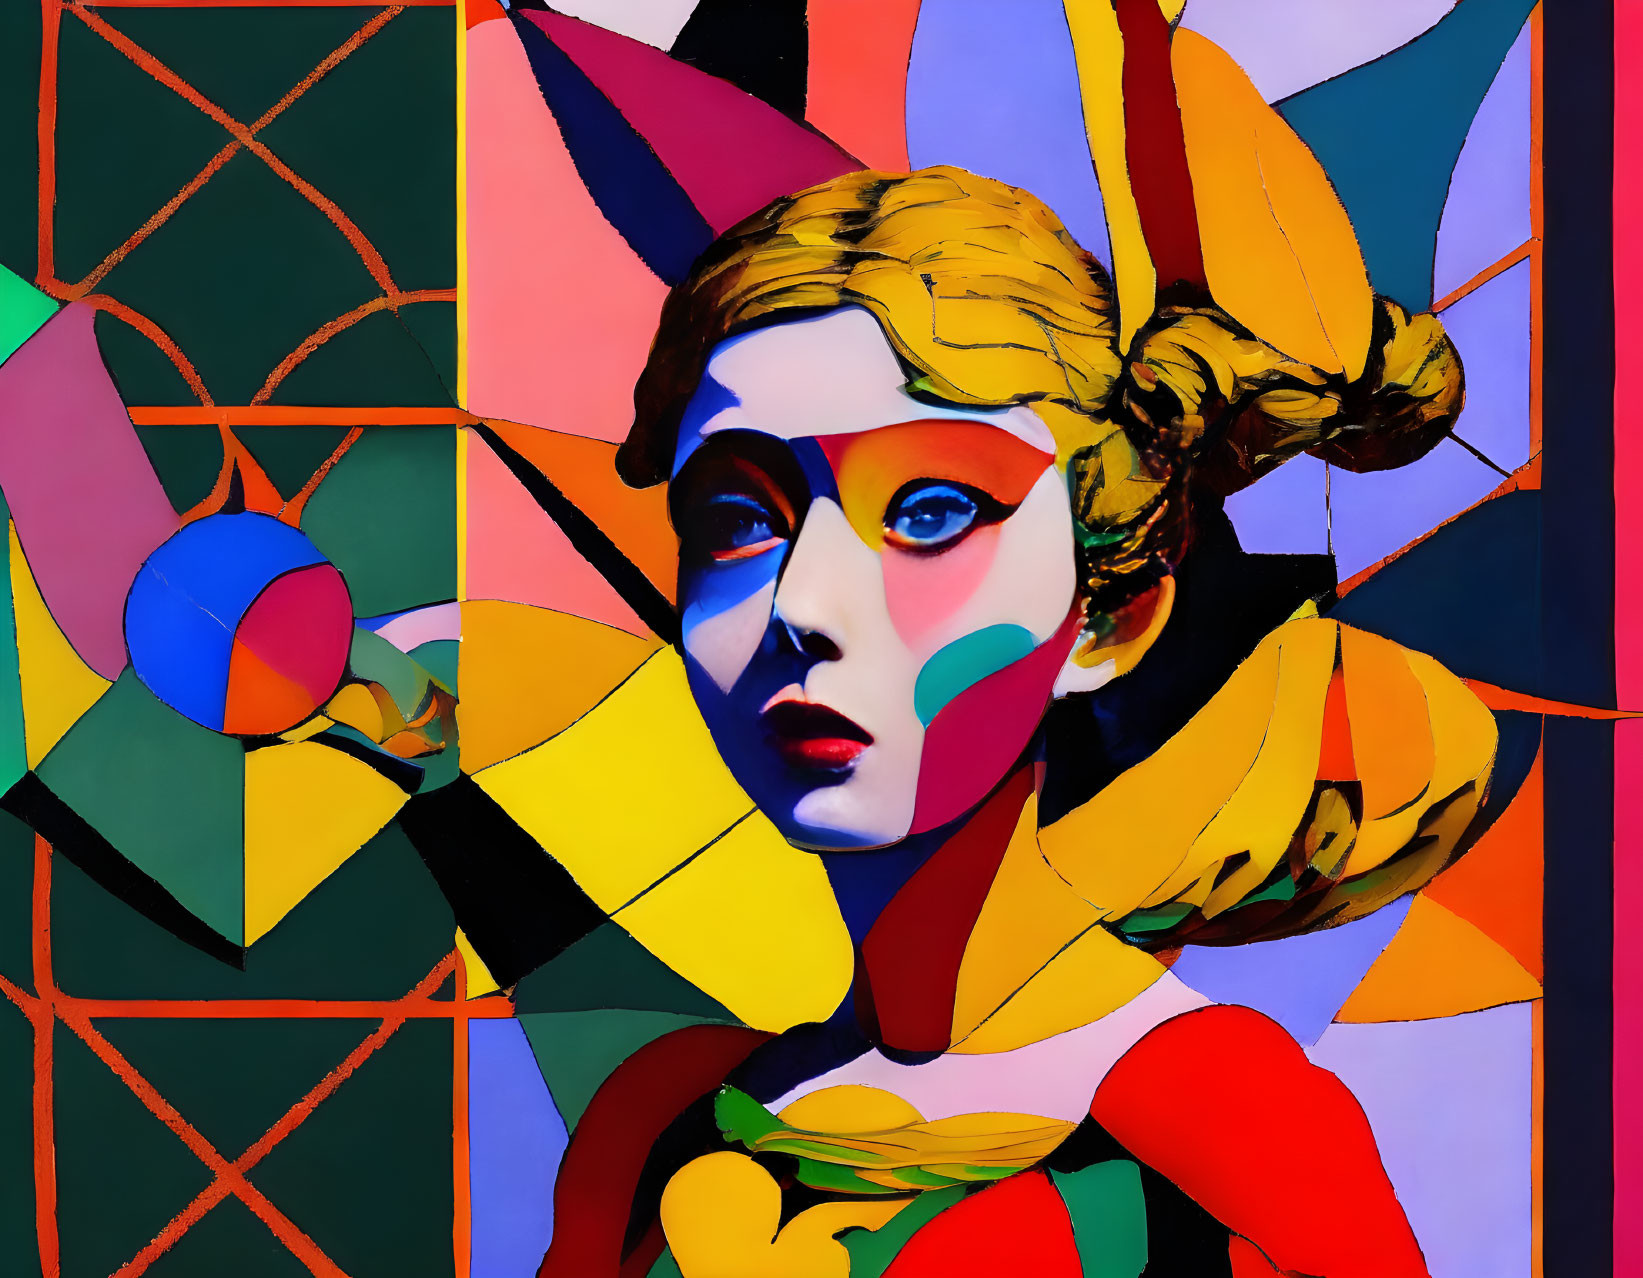 Vibrant abstract portrait of a woman with exaggerated features and geometric patterns